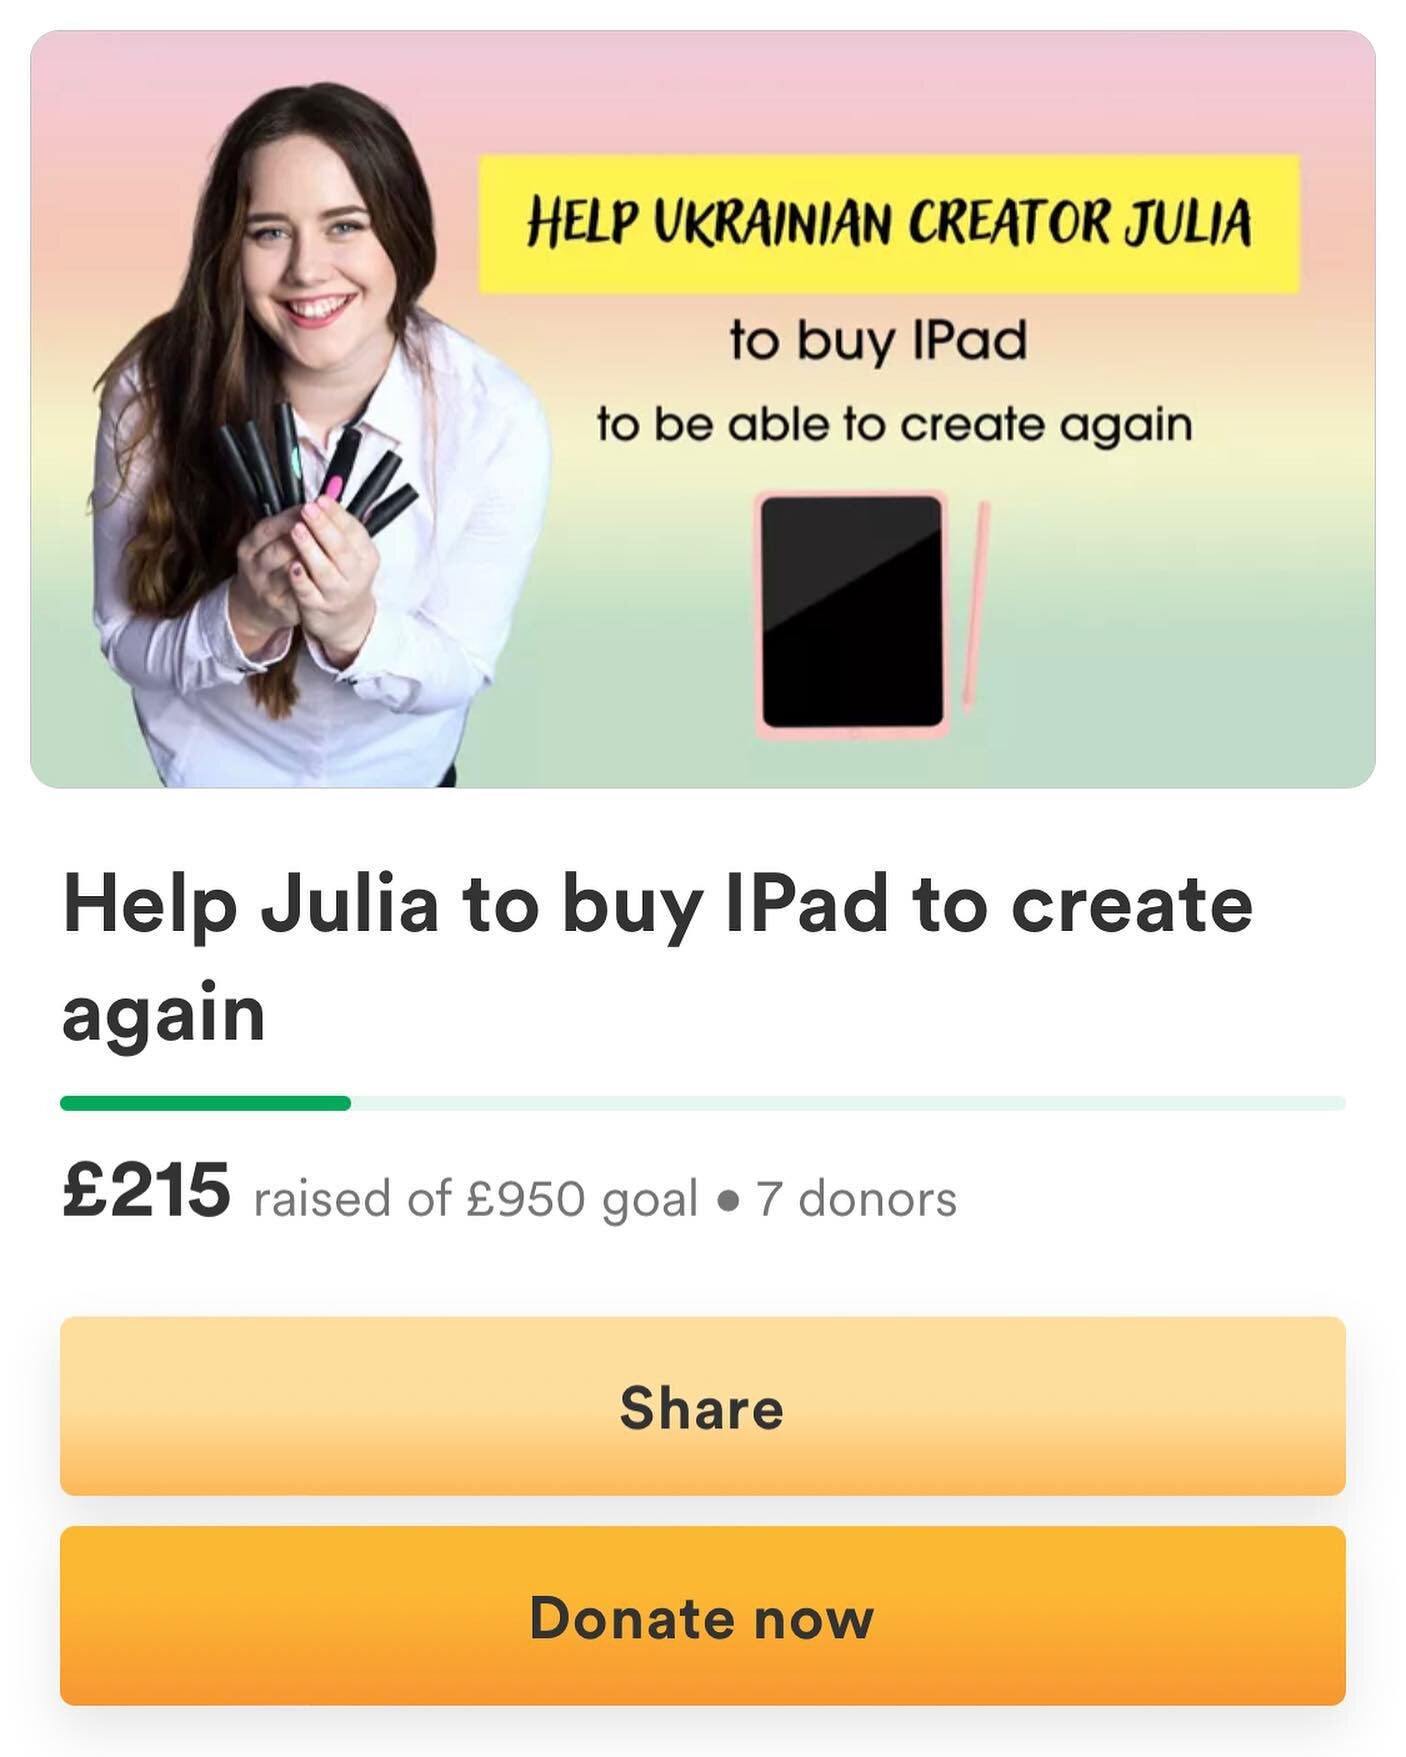 Hey sketchnoters, we have an opportunity to help a fellow visual thinker! Our friend @julia.knyupa who fled Ukraine for England because of the war needs a new iPad setup to do her work - consider a donation to her GoFundMe campaign! gofundme.com/f/he